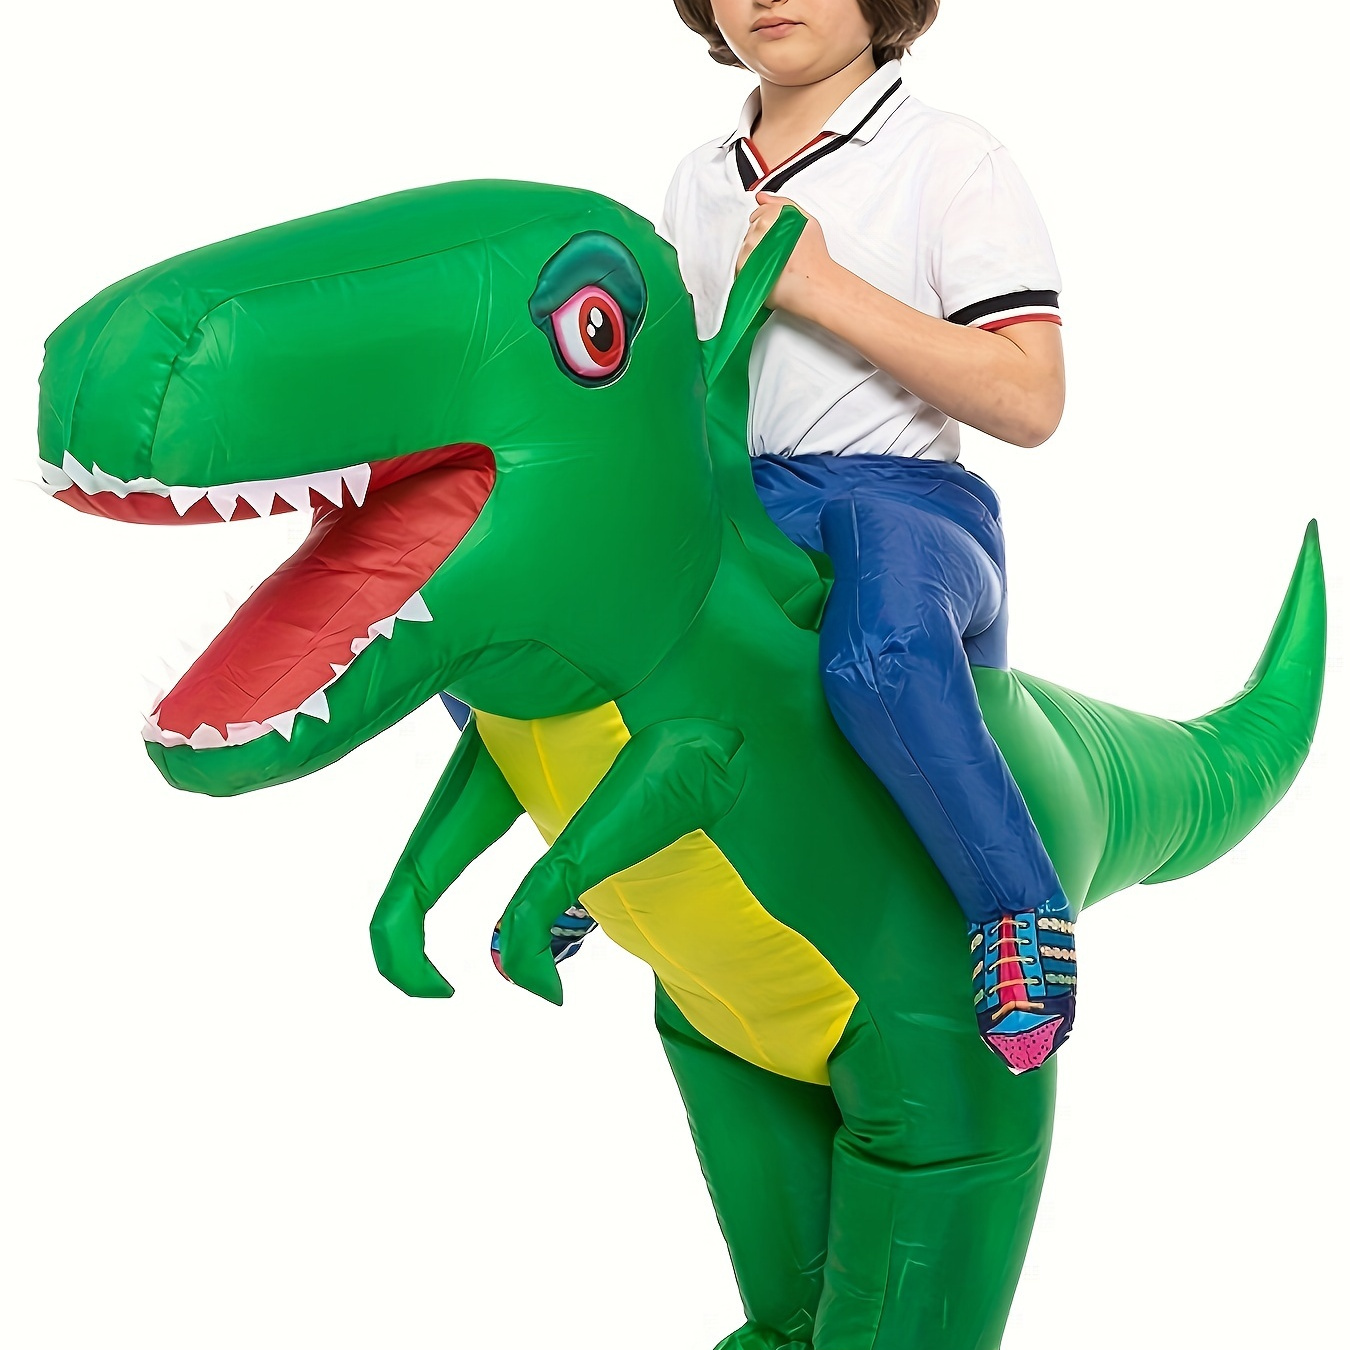 

Boys Inflatable Dinosaur Clothing For Kids, Funny Blow Up T-rex Dino Clothing For Halloween